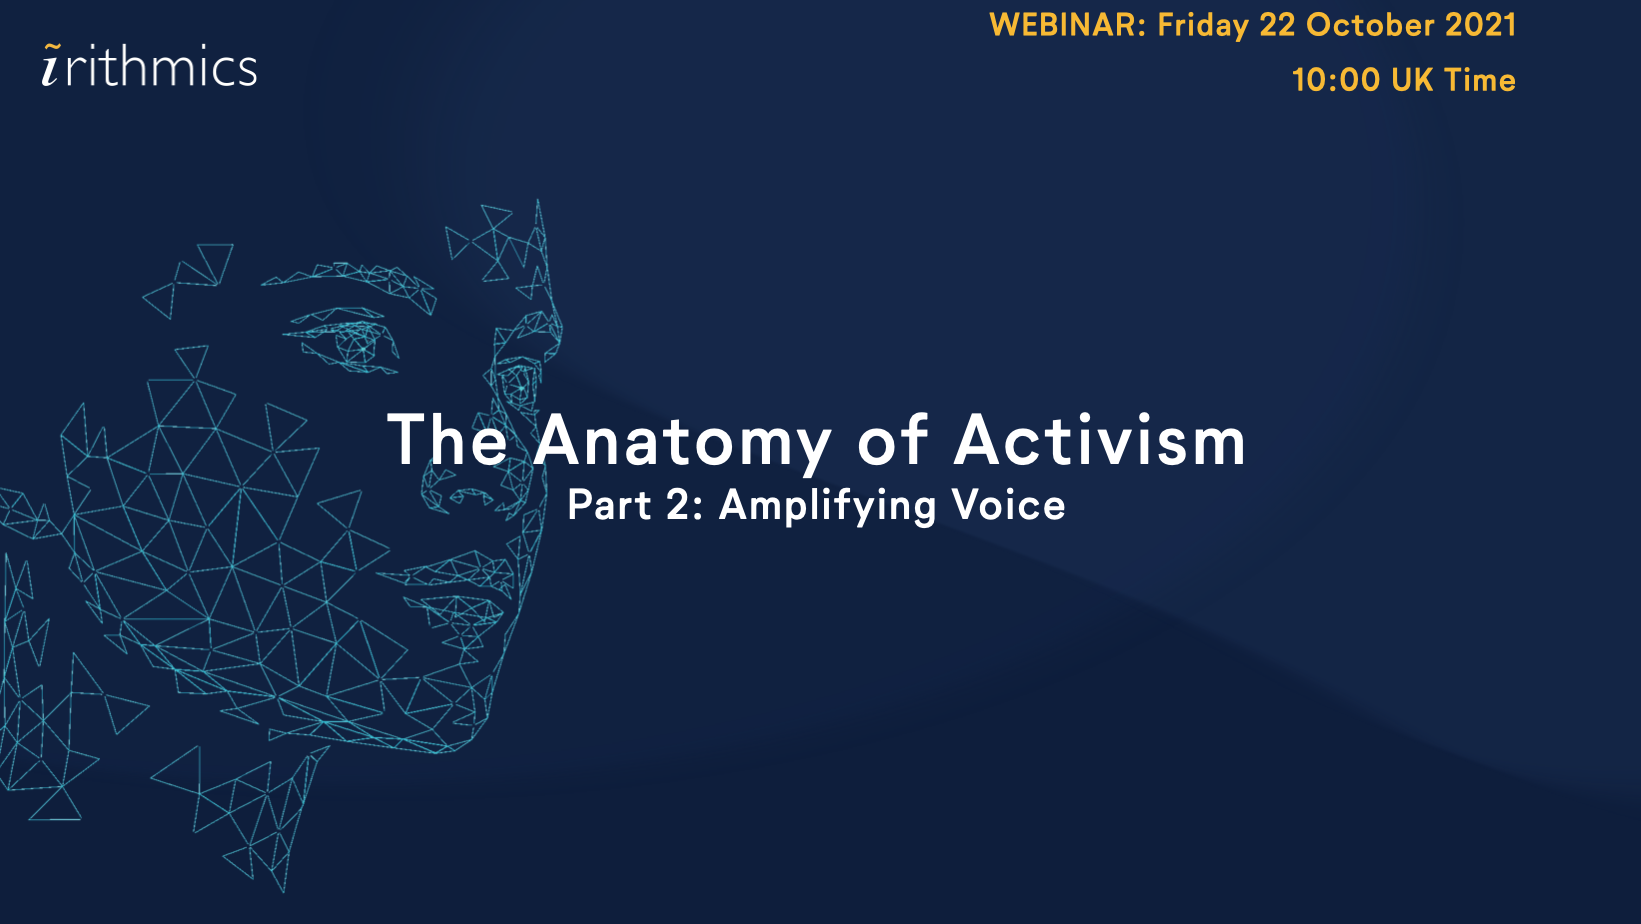 The Anatomy of Activism (Part 2: Amplifying Voice) Friday 22 October 2021